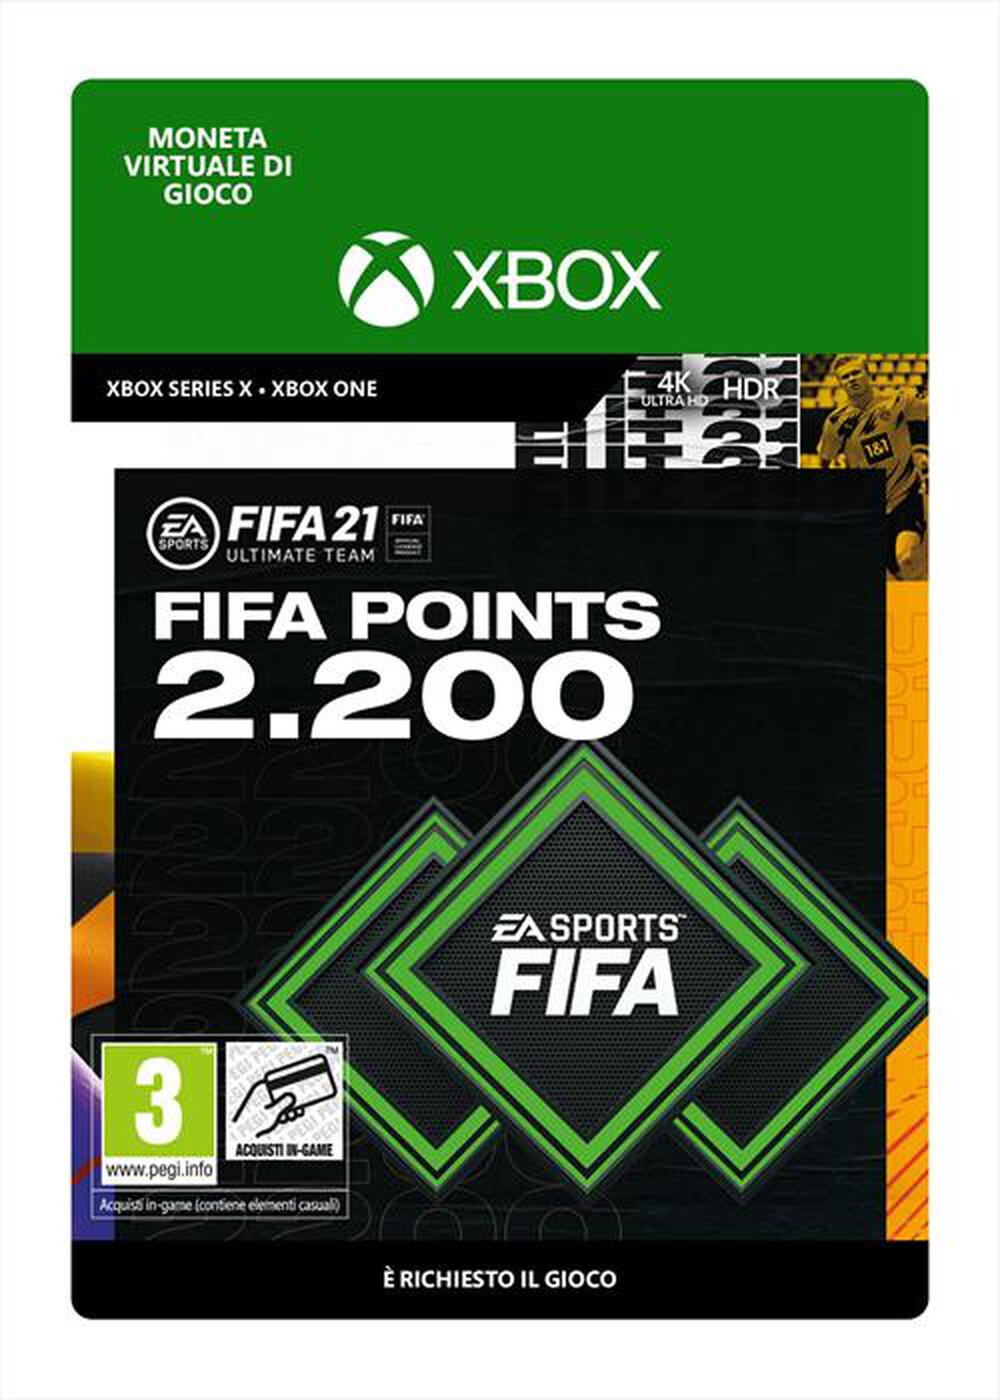 "MICROSOFT - FIFA 21 Ultimate Team 2200 Points"